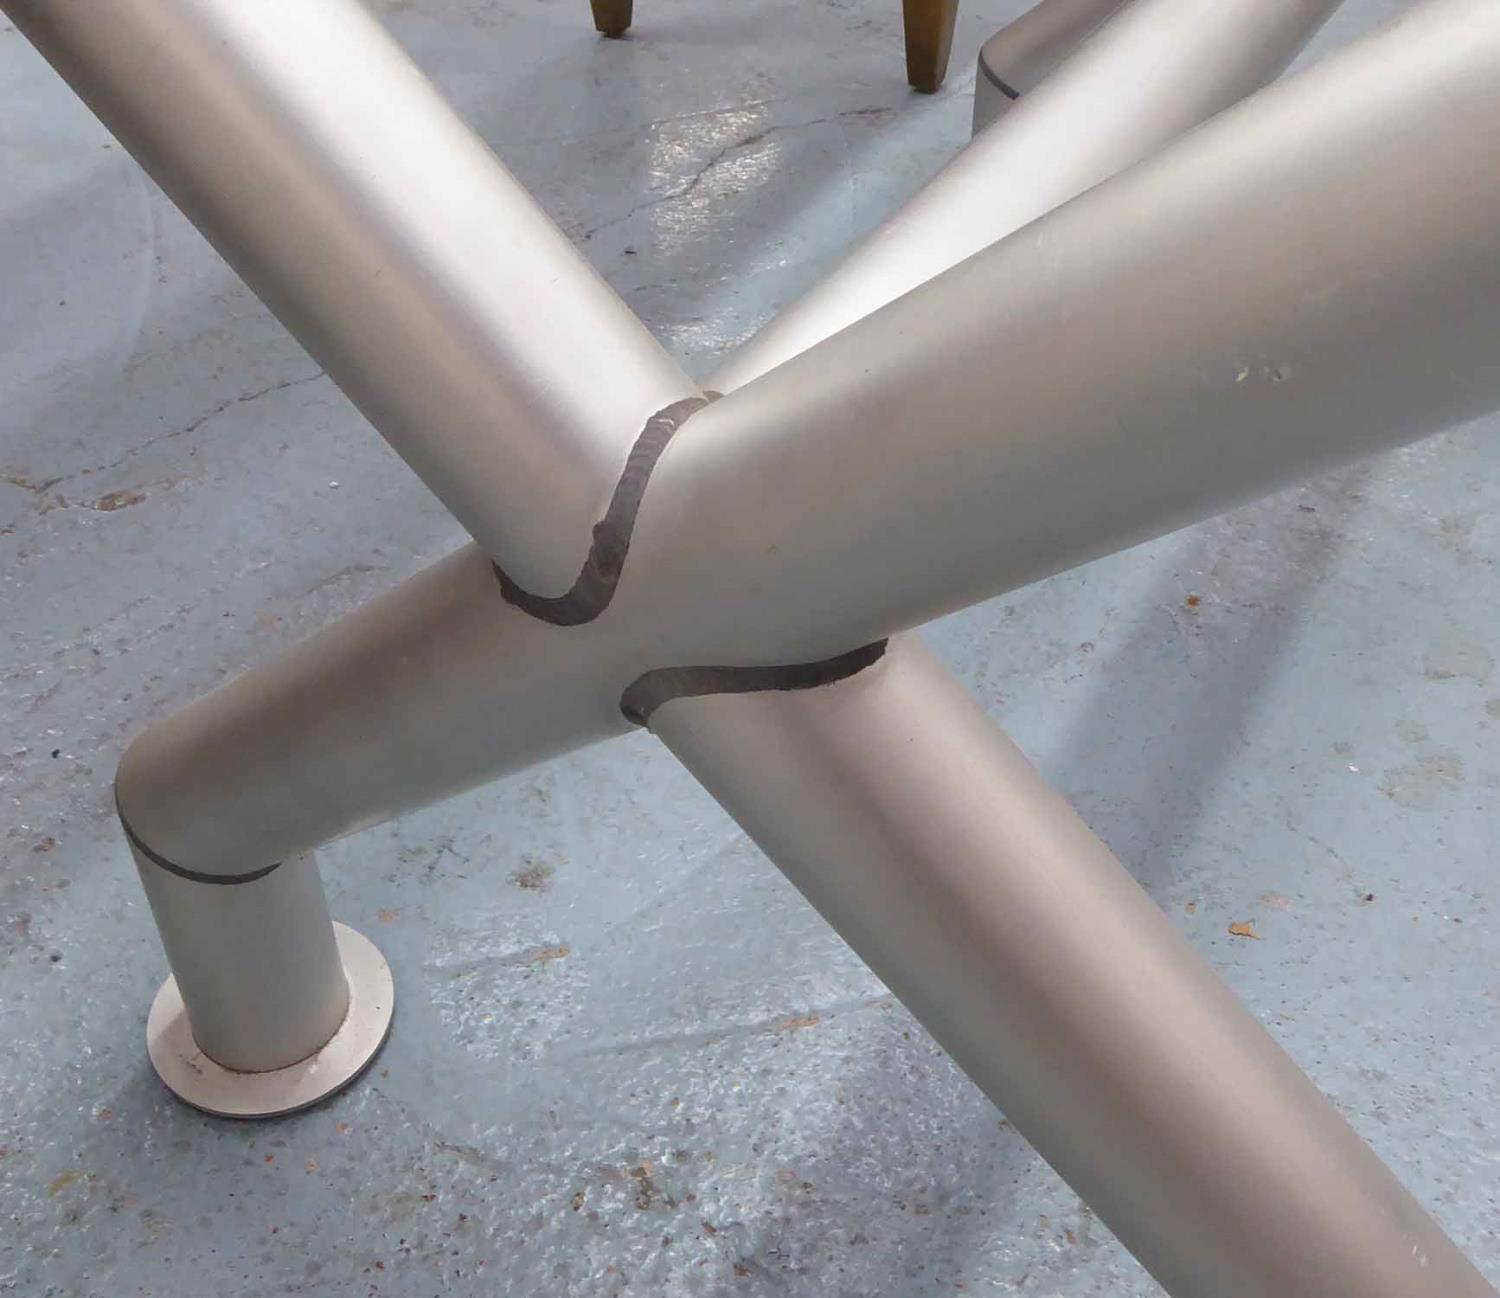 TABLE, Industrial style, the glass top on tubular metal supports, 160cm L x 80cm D x 77cm H. - Image 2 of 2